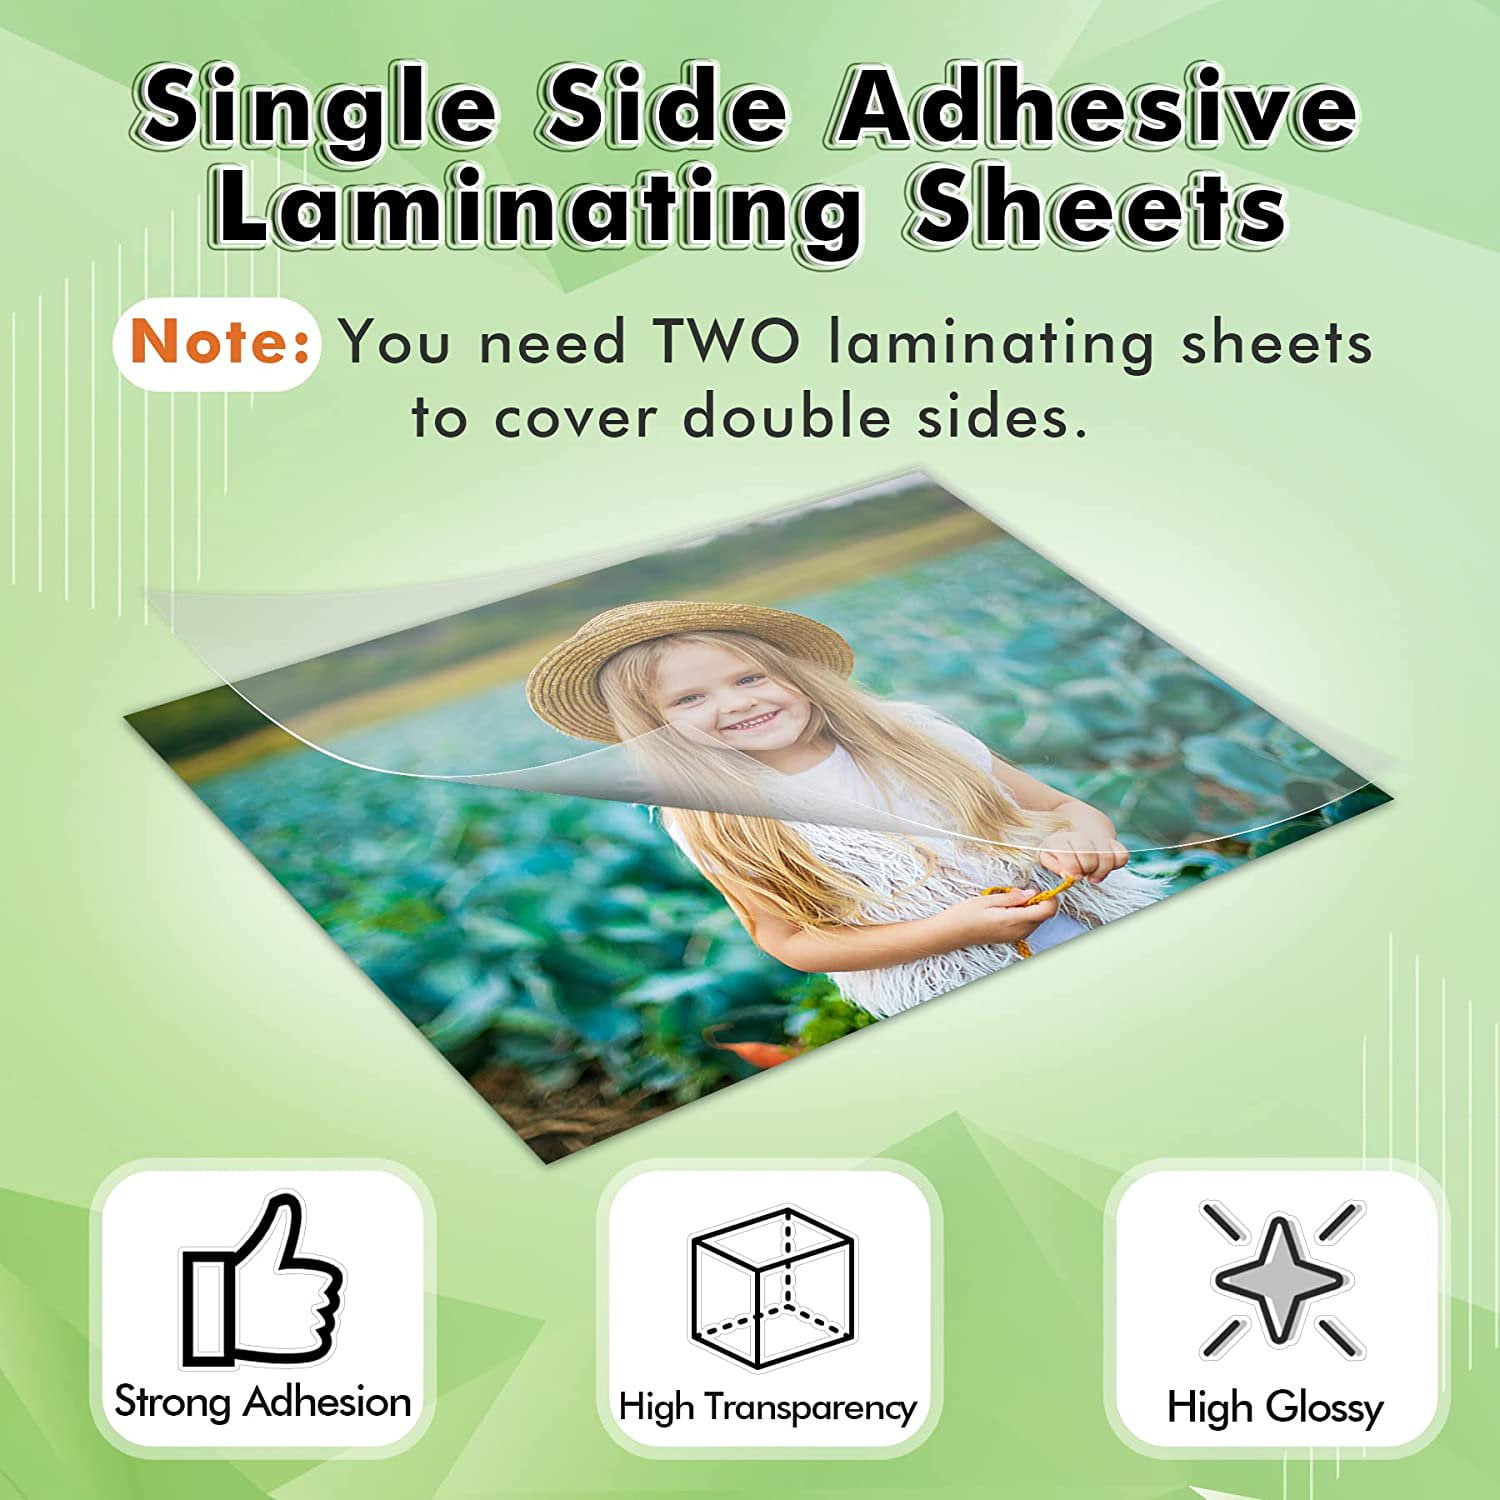 Clear Self-Adhesive Laminating Sheets, 3 mil, 9 x 12, Matte Clear, 50/Box